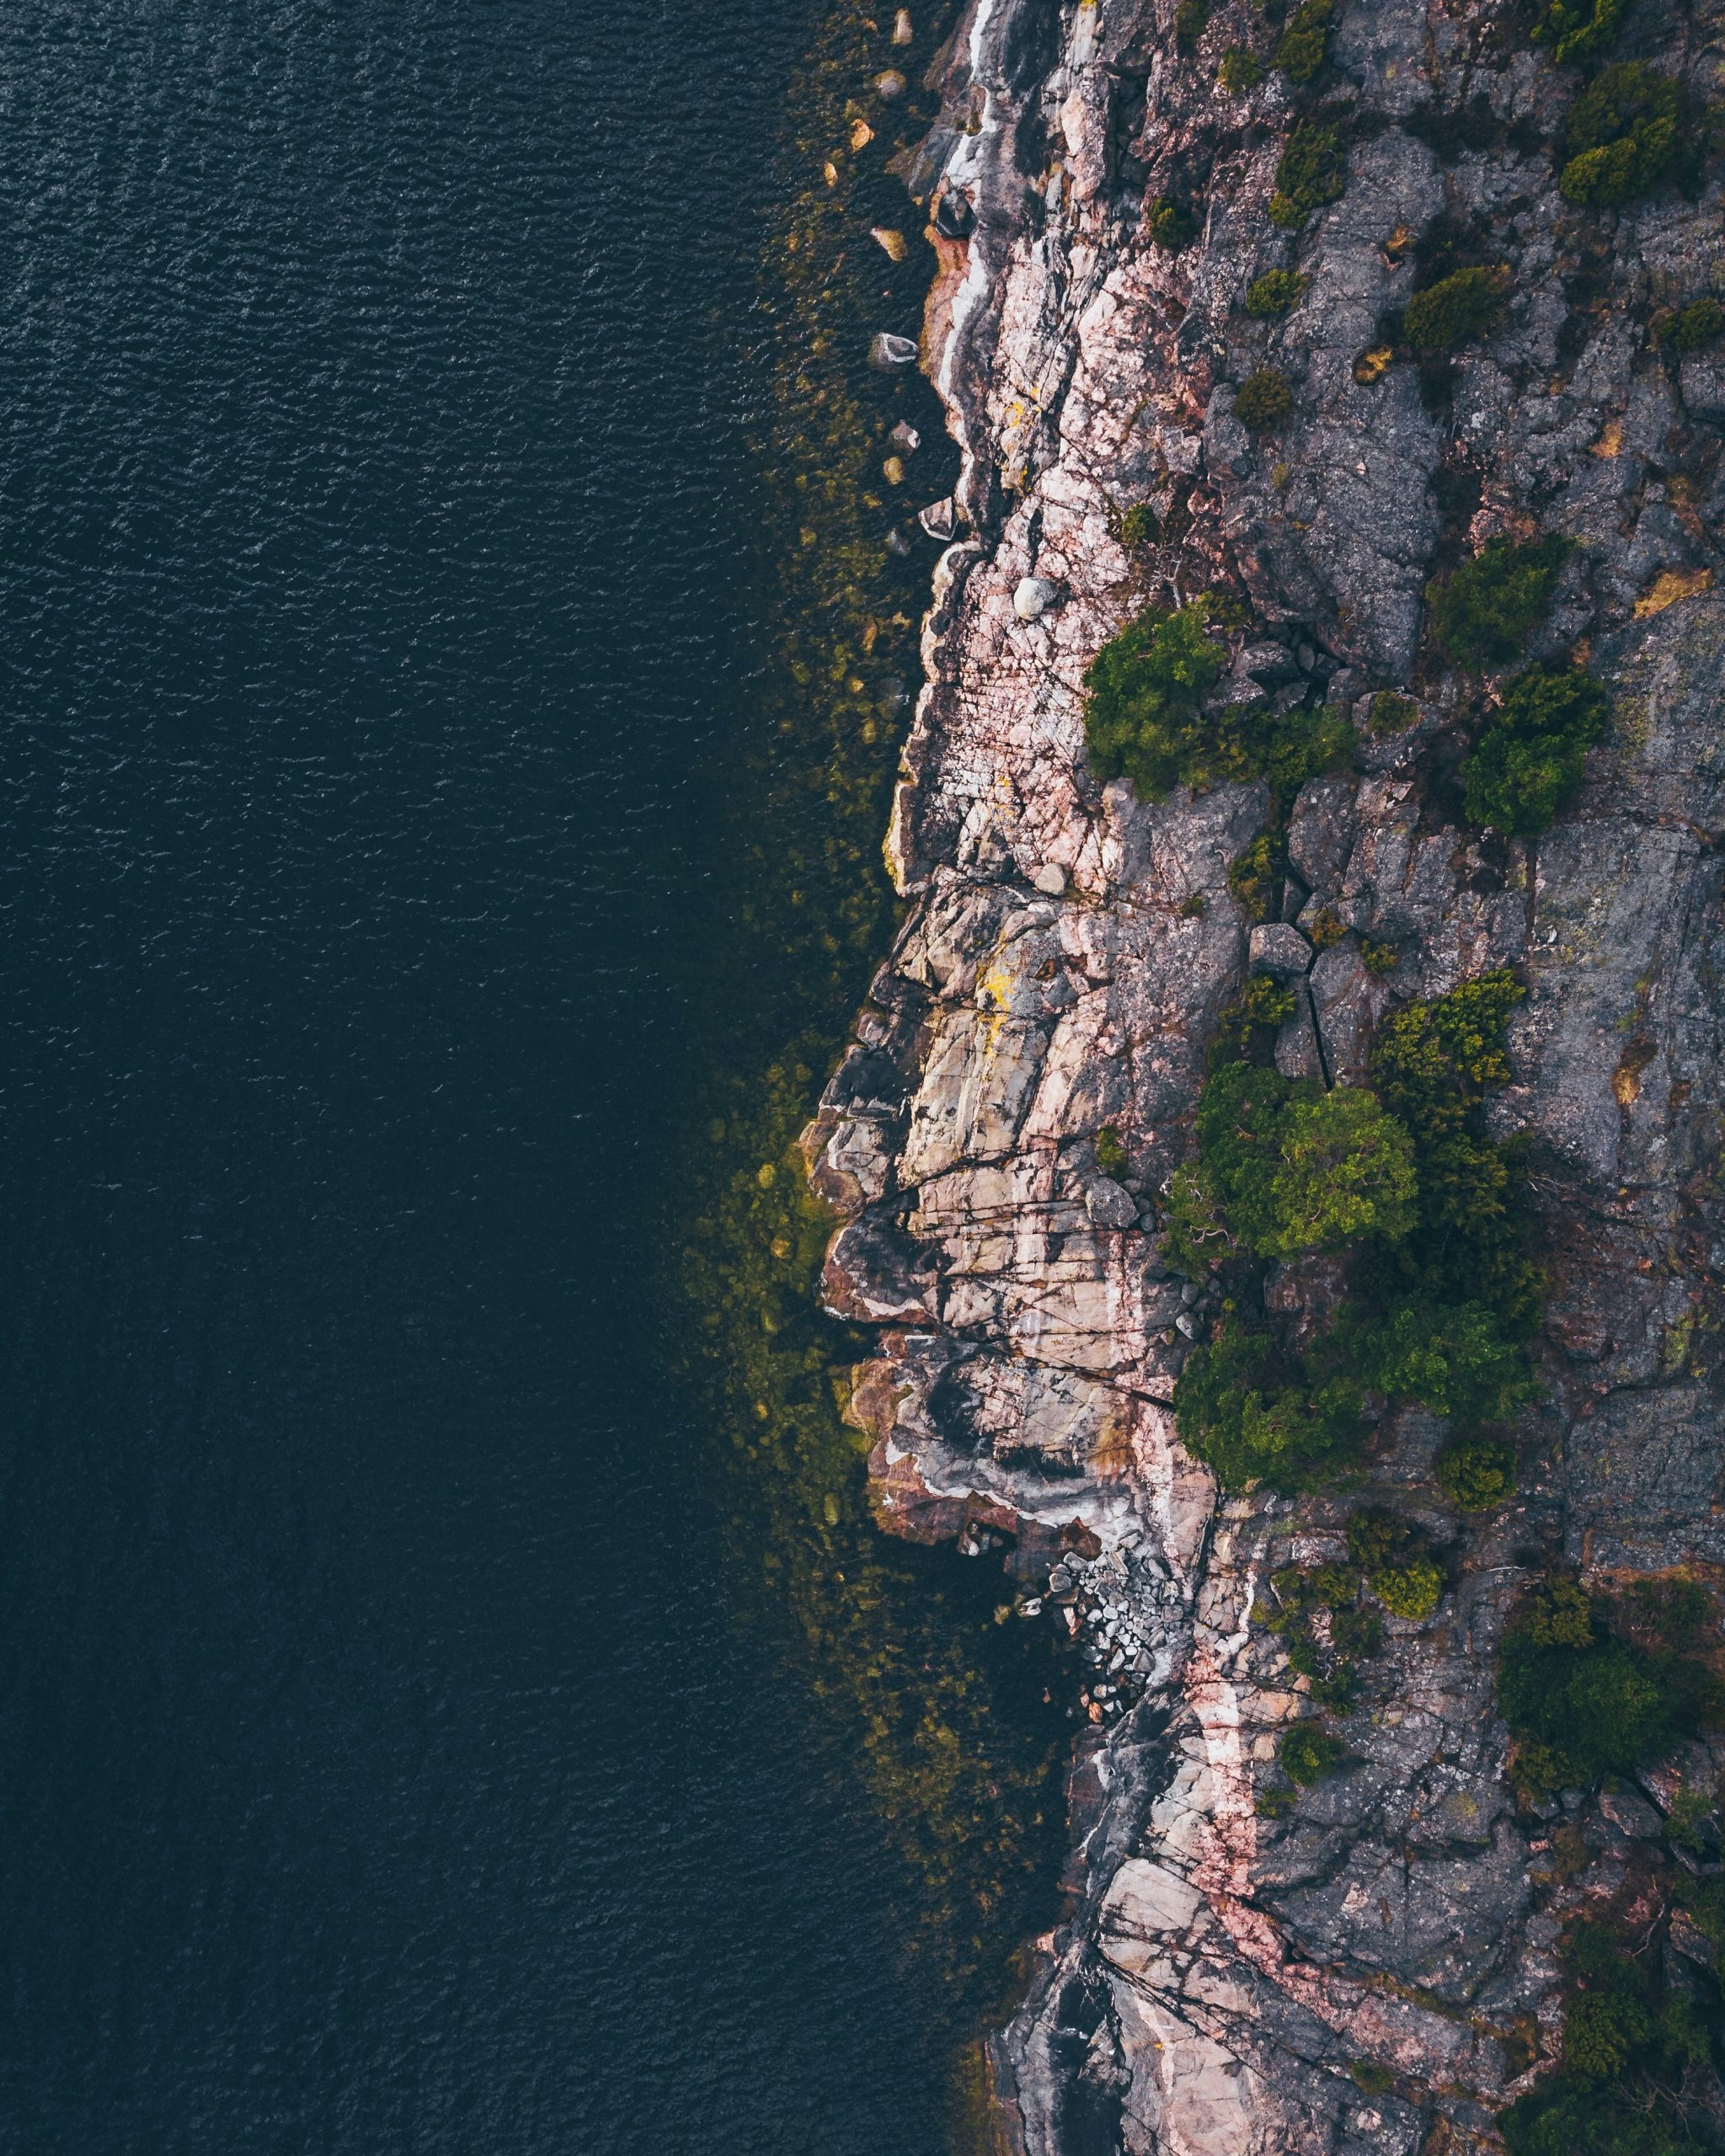 An aerial image taken top down over the swedish coast. On the left side there's water and on the right there's cliffs and a few trees.